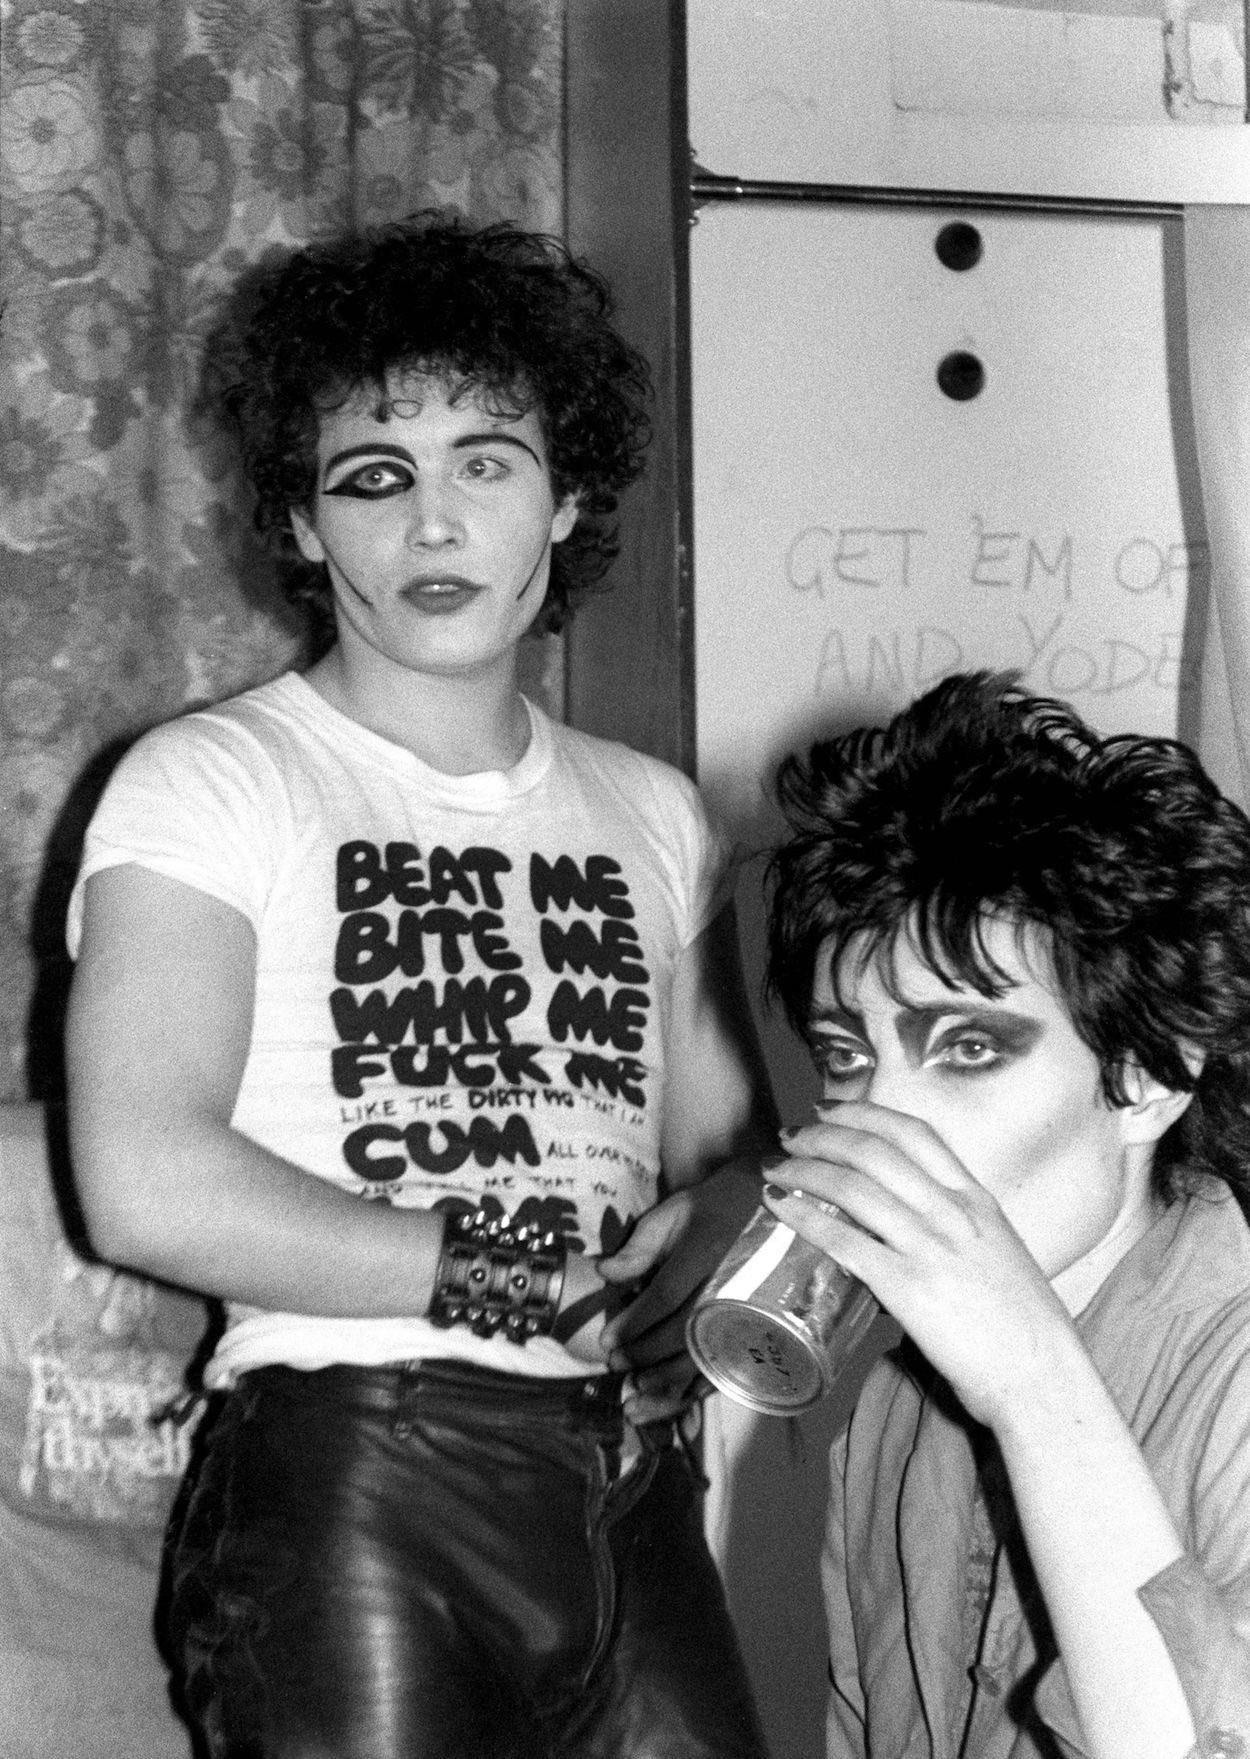 Happy 65th Birthday Adam Ant.
Ridicule is nothing to be scared of. 